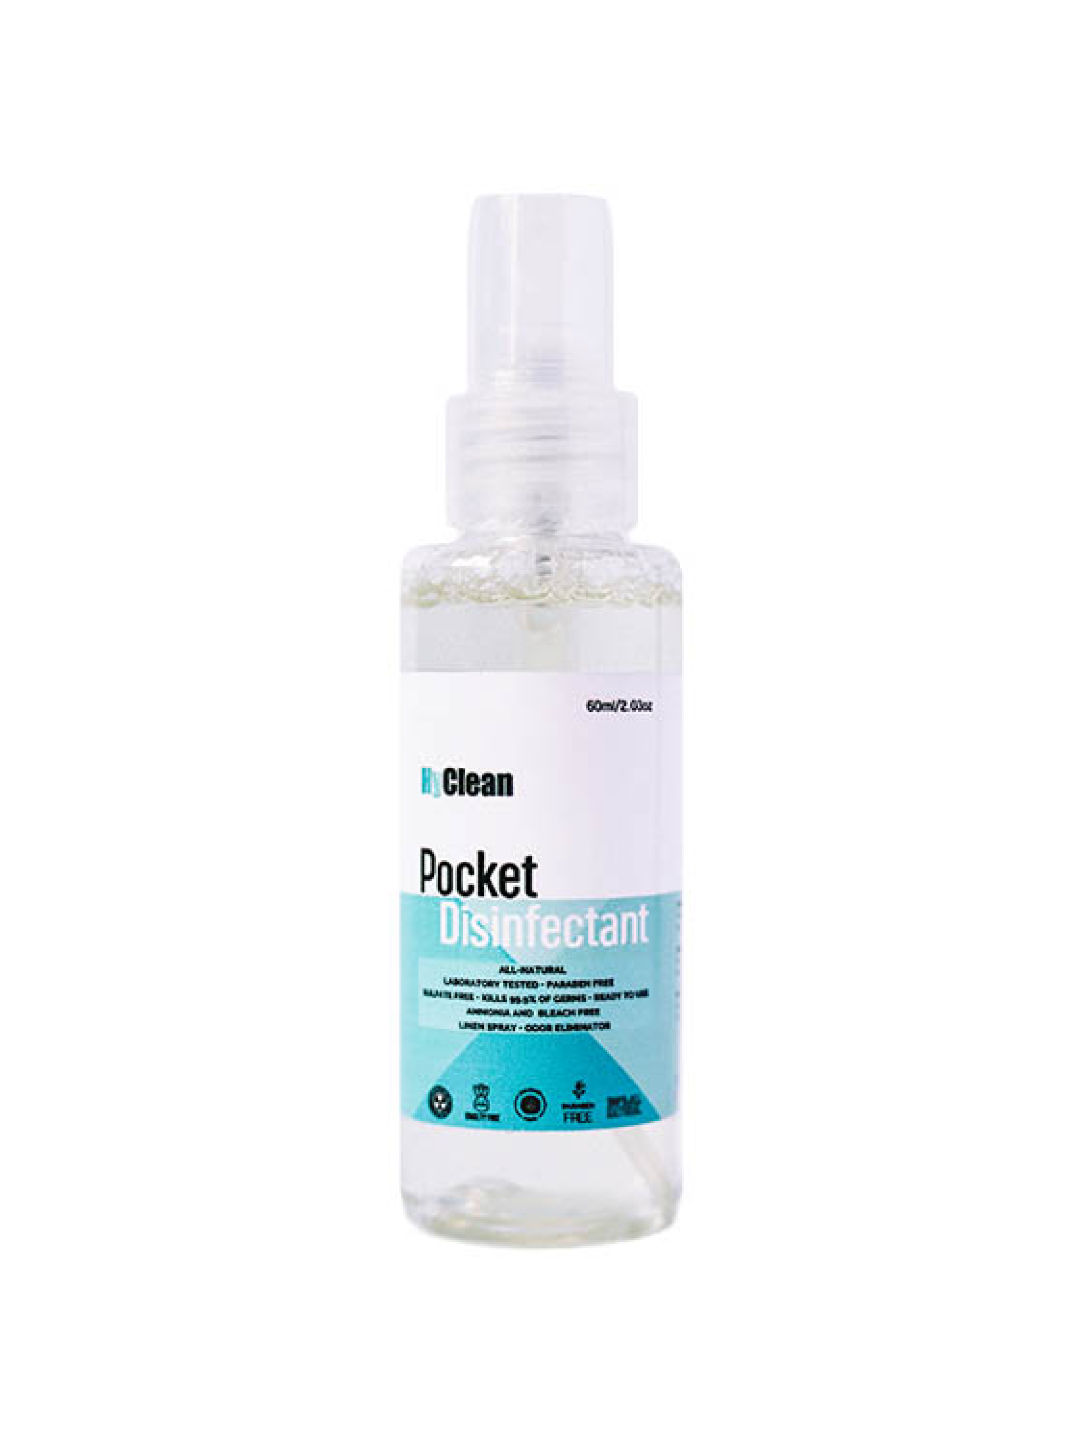 HYCLEAN Pocket Disinfectant (60ml)